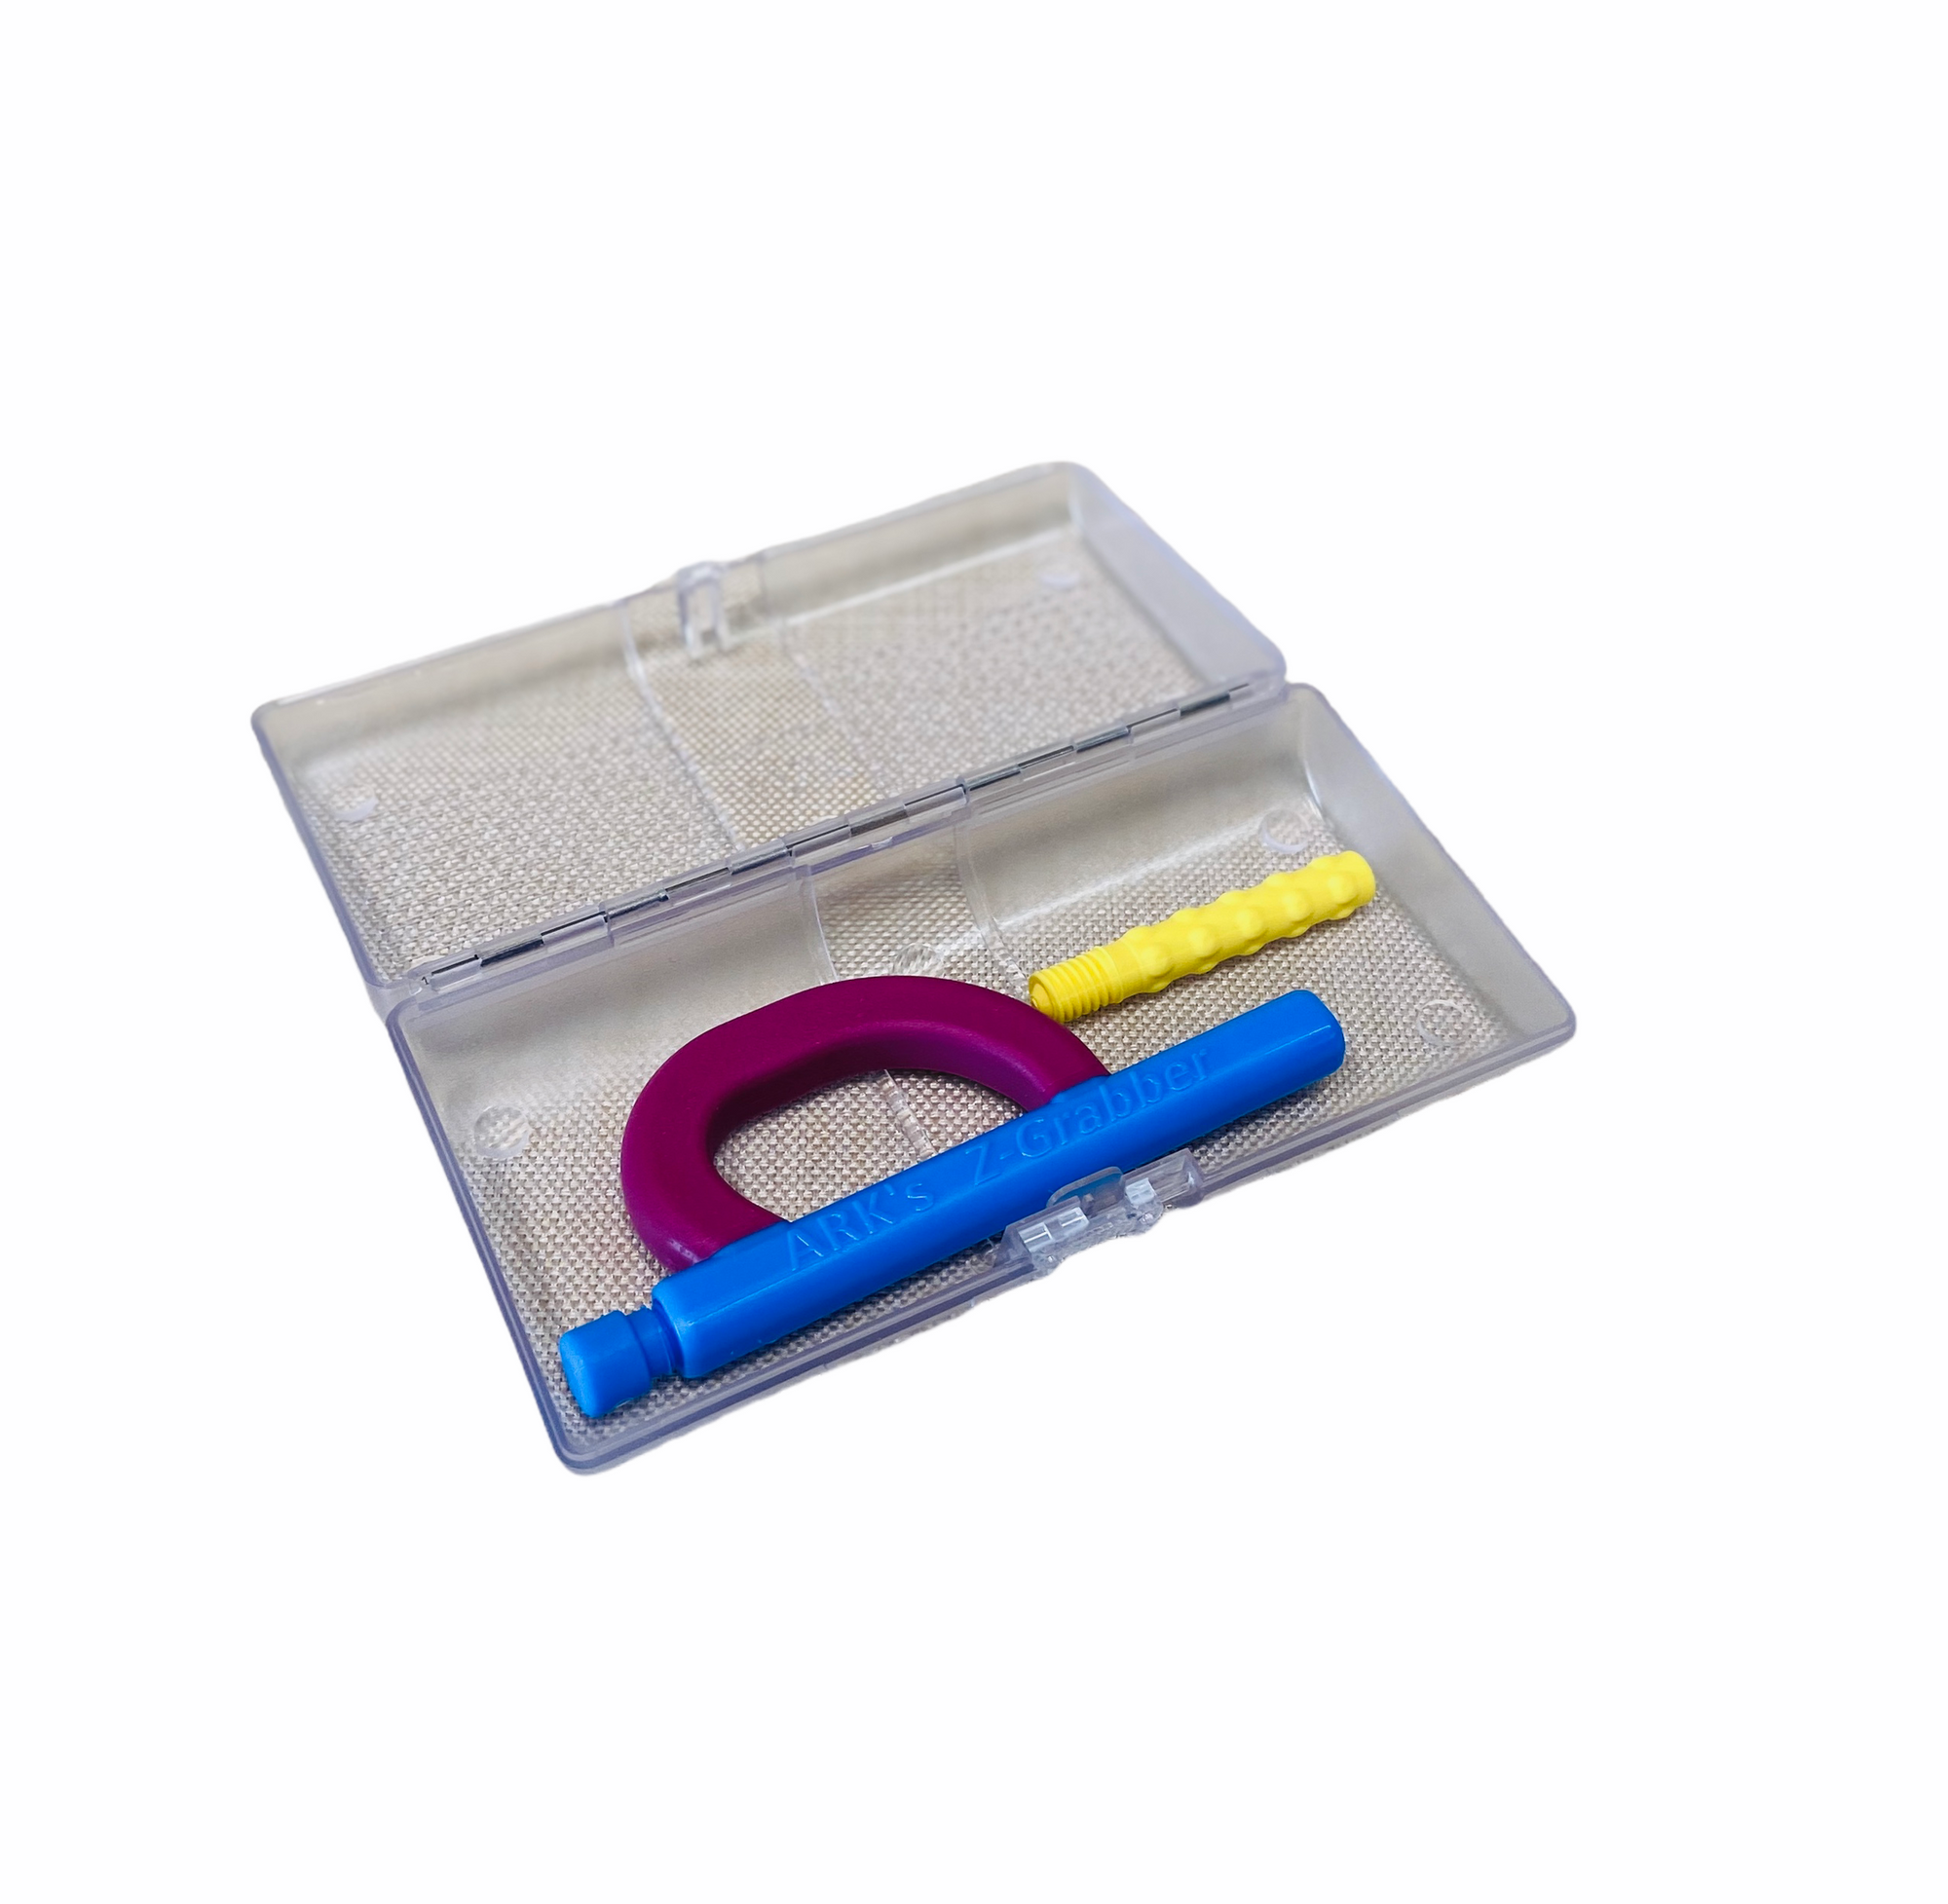 Ark Z-VIBE® Storage Case open on white background with Z-Grabber placed inside